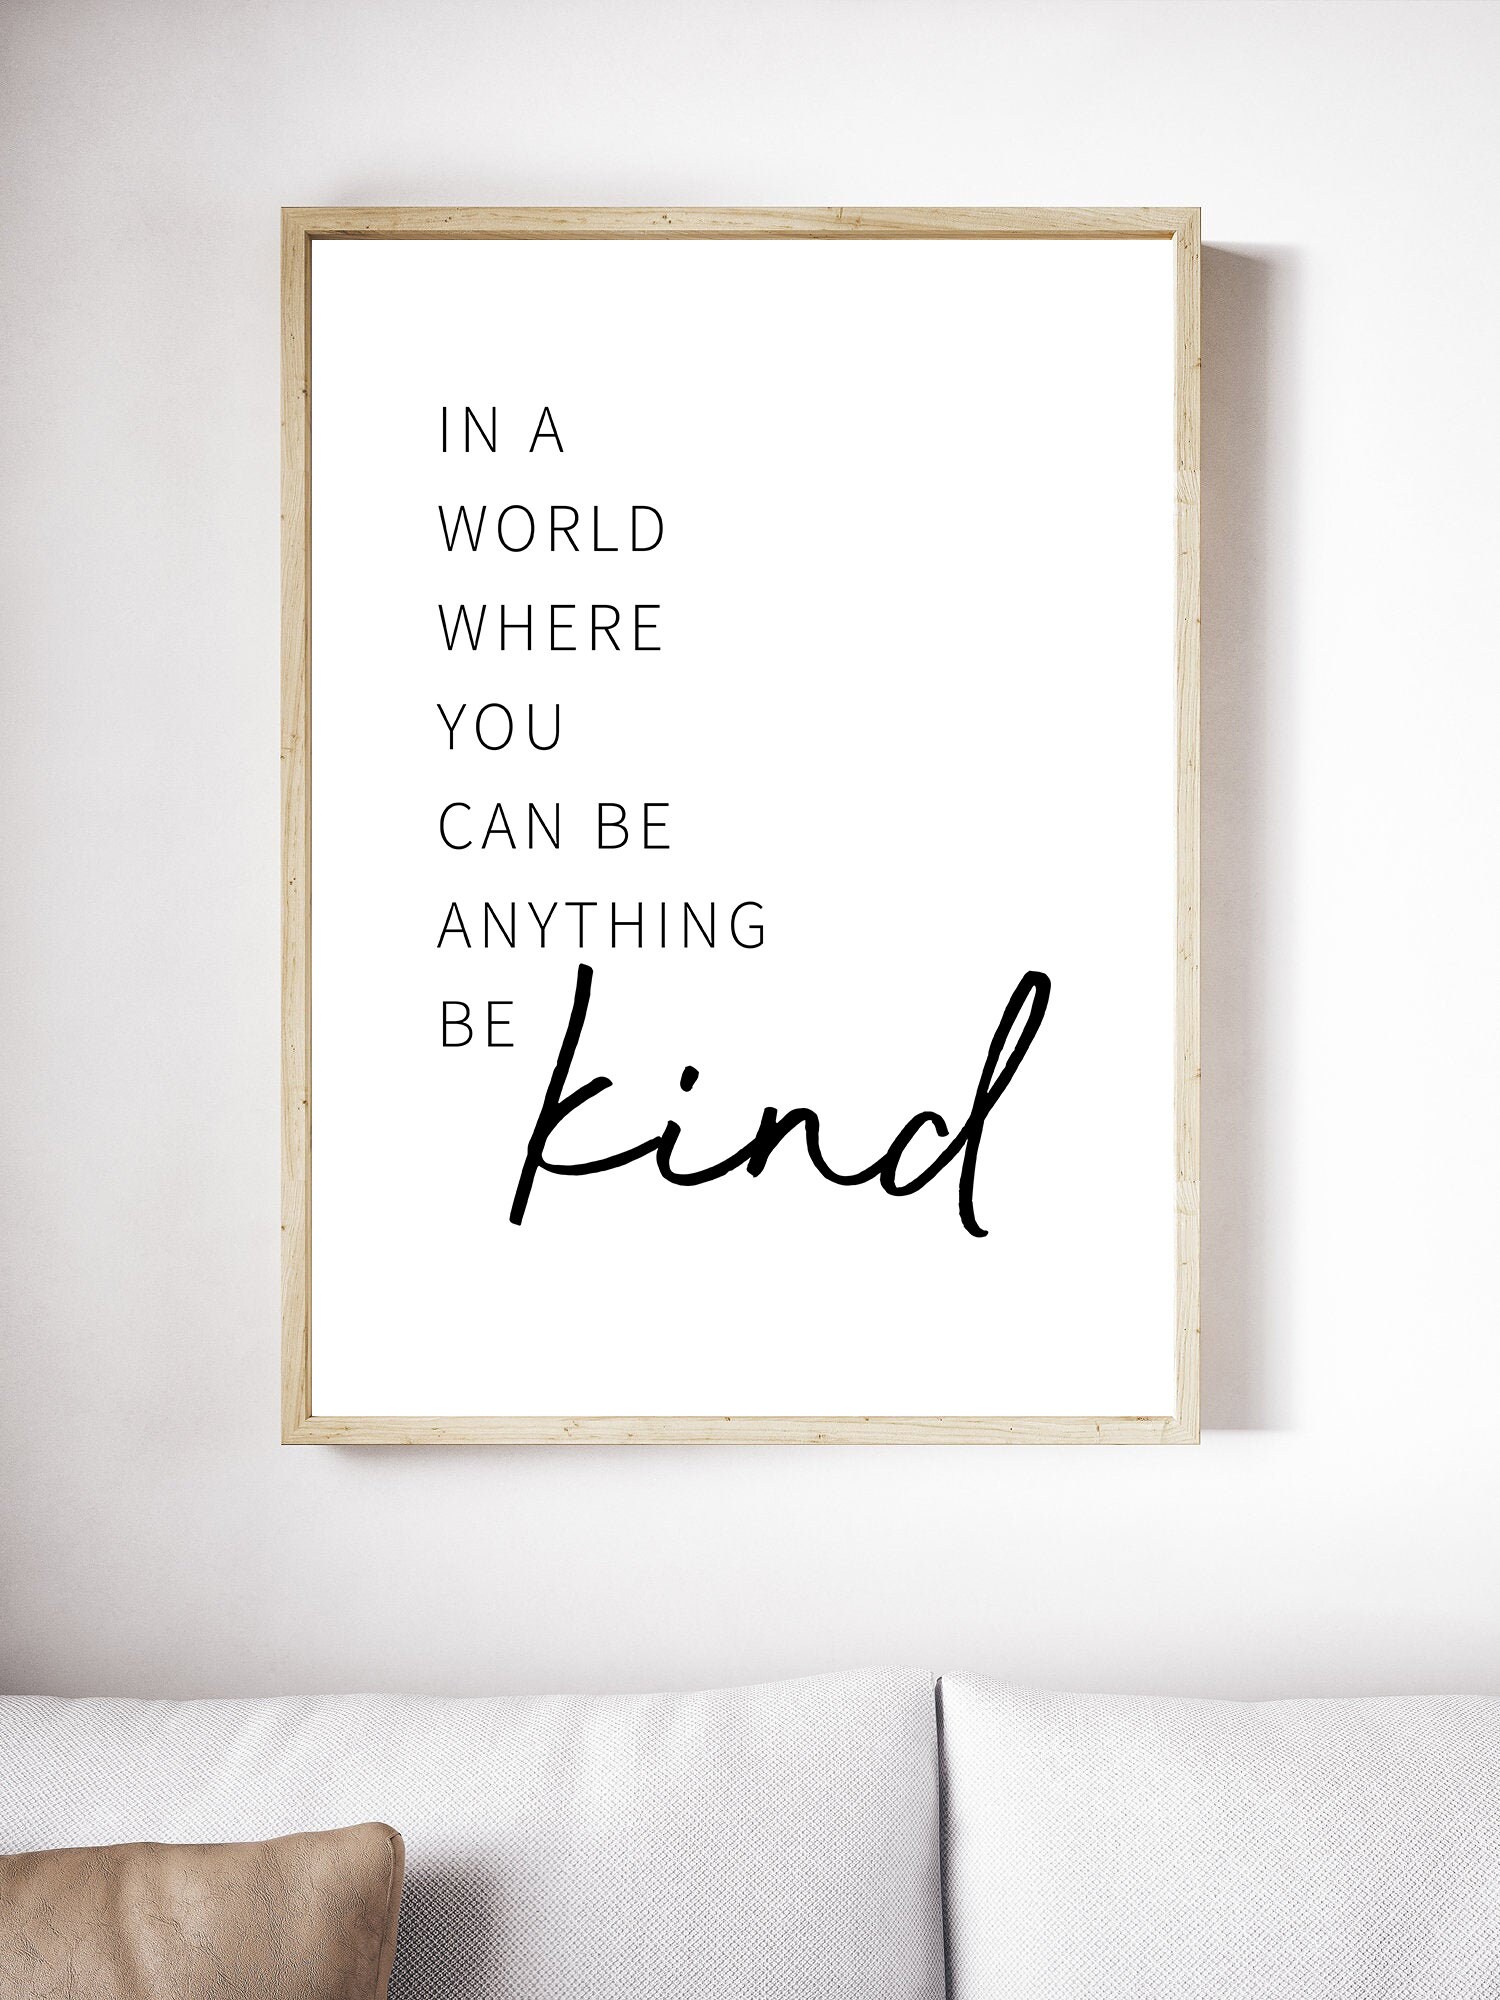 Be Kind Wall Art in A World Where You Can Be Anything Be Kind - Etsy